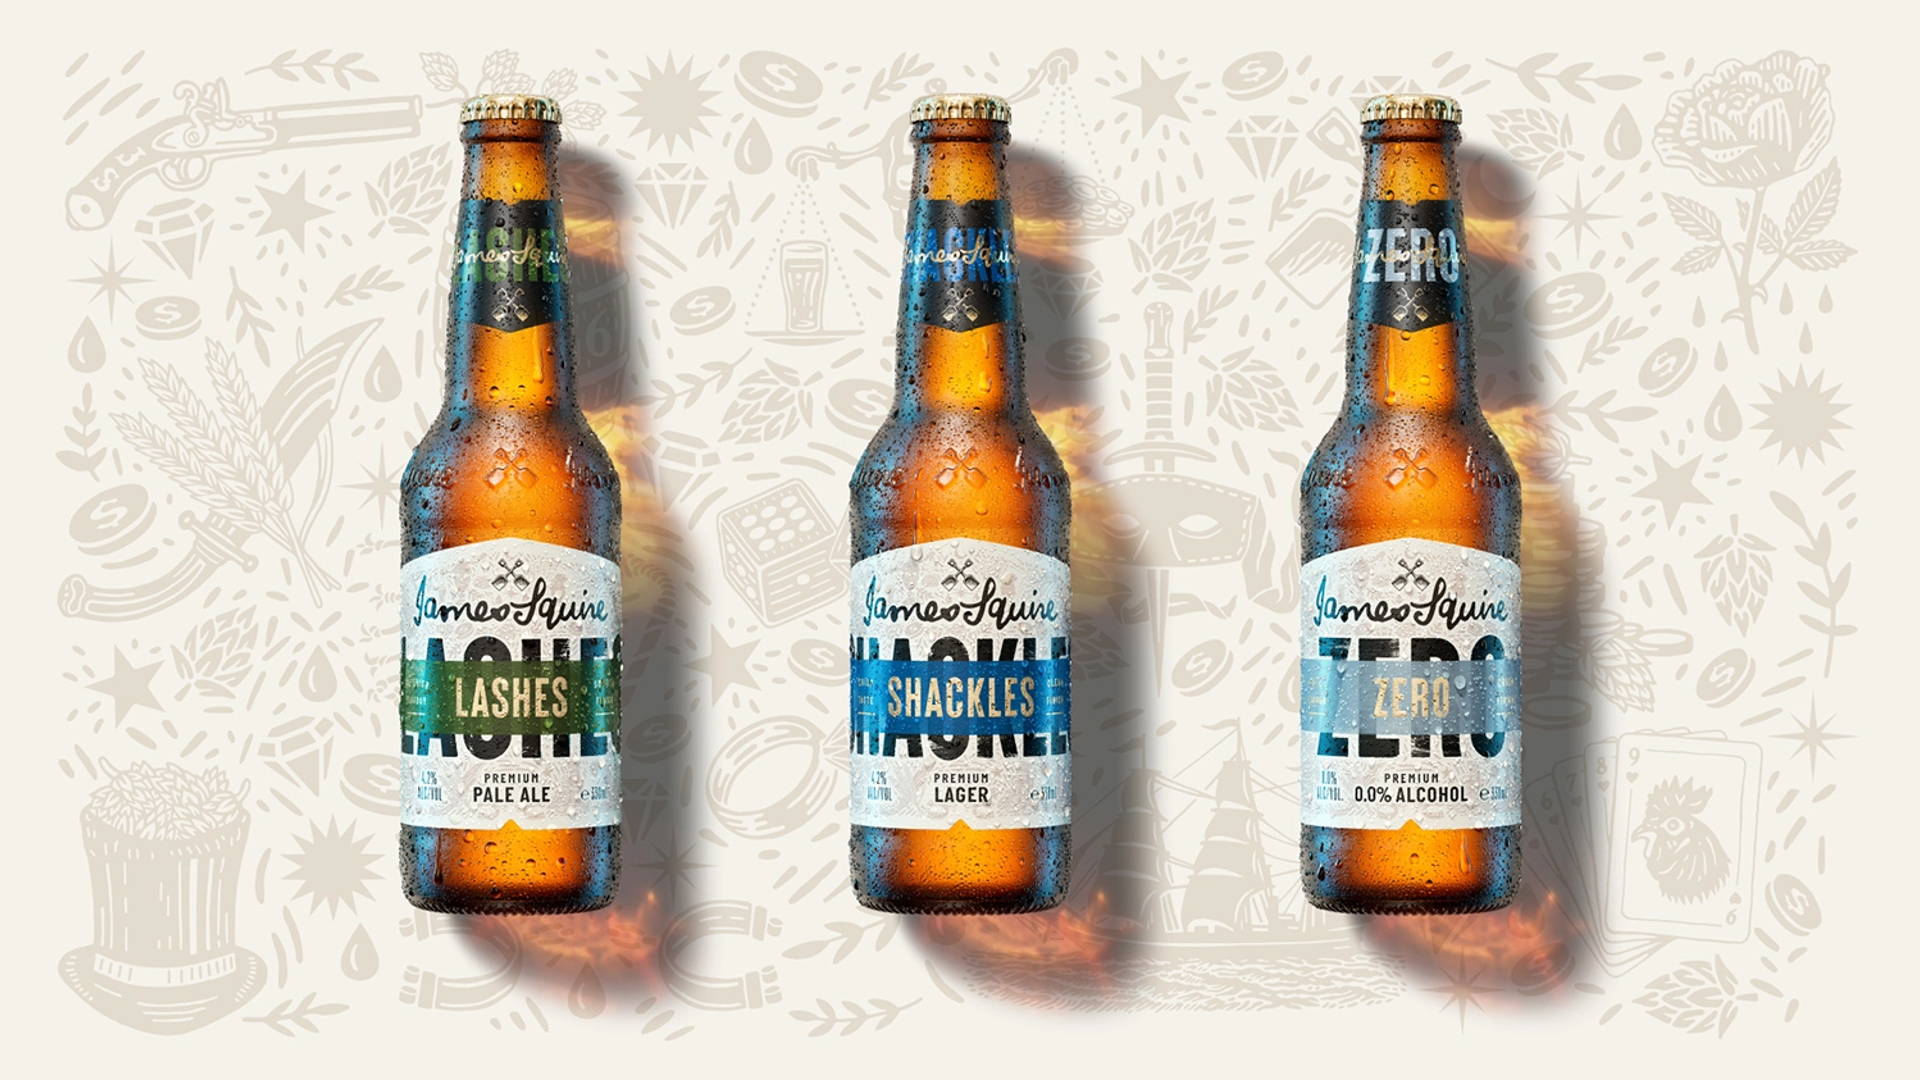 Featured image for James Squire Craft Beer Packaging Design by Landor & Fitch